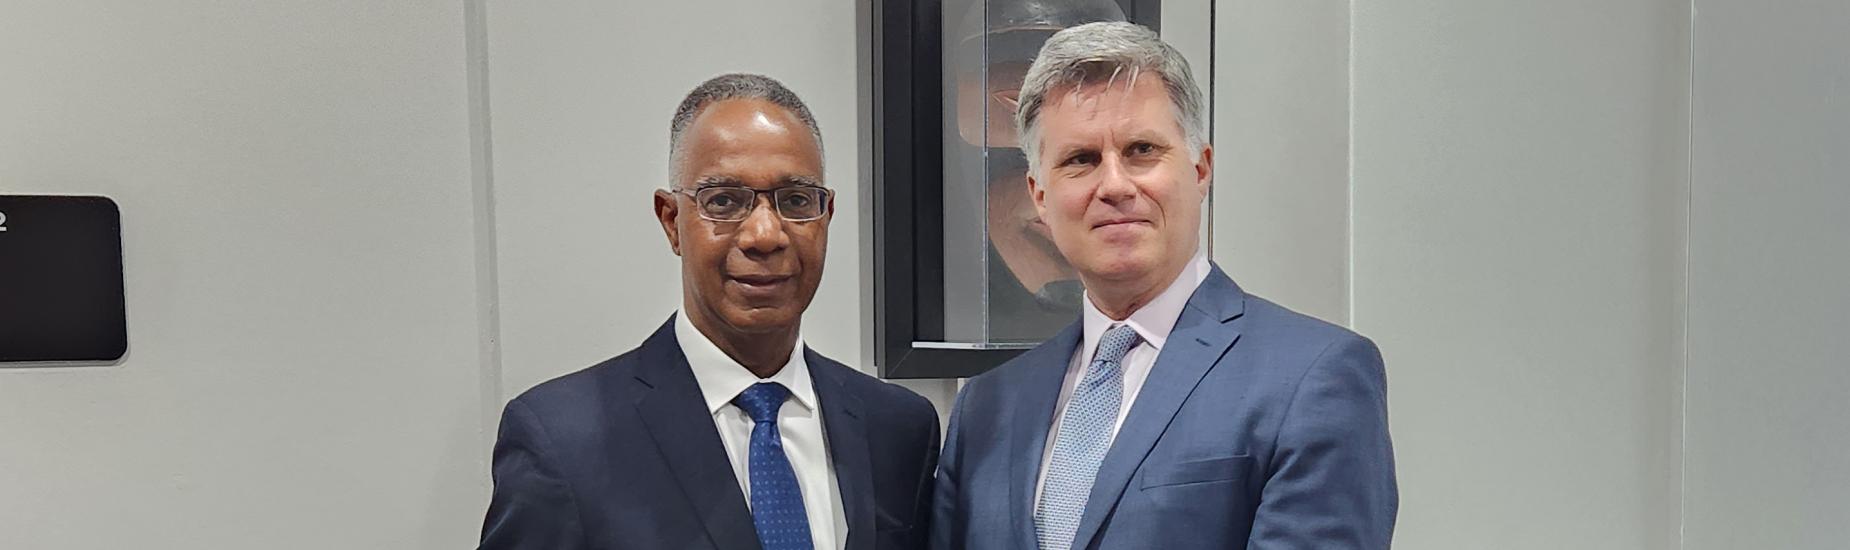 Gervan Fearon with Canadian High Commission in India David McKay